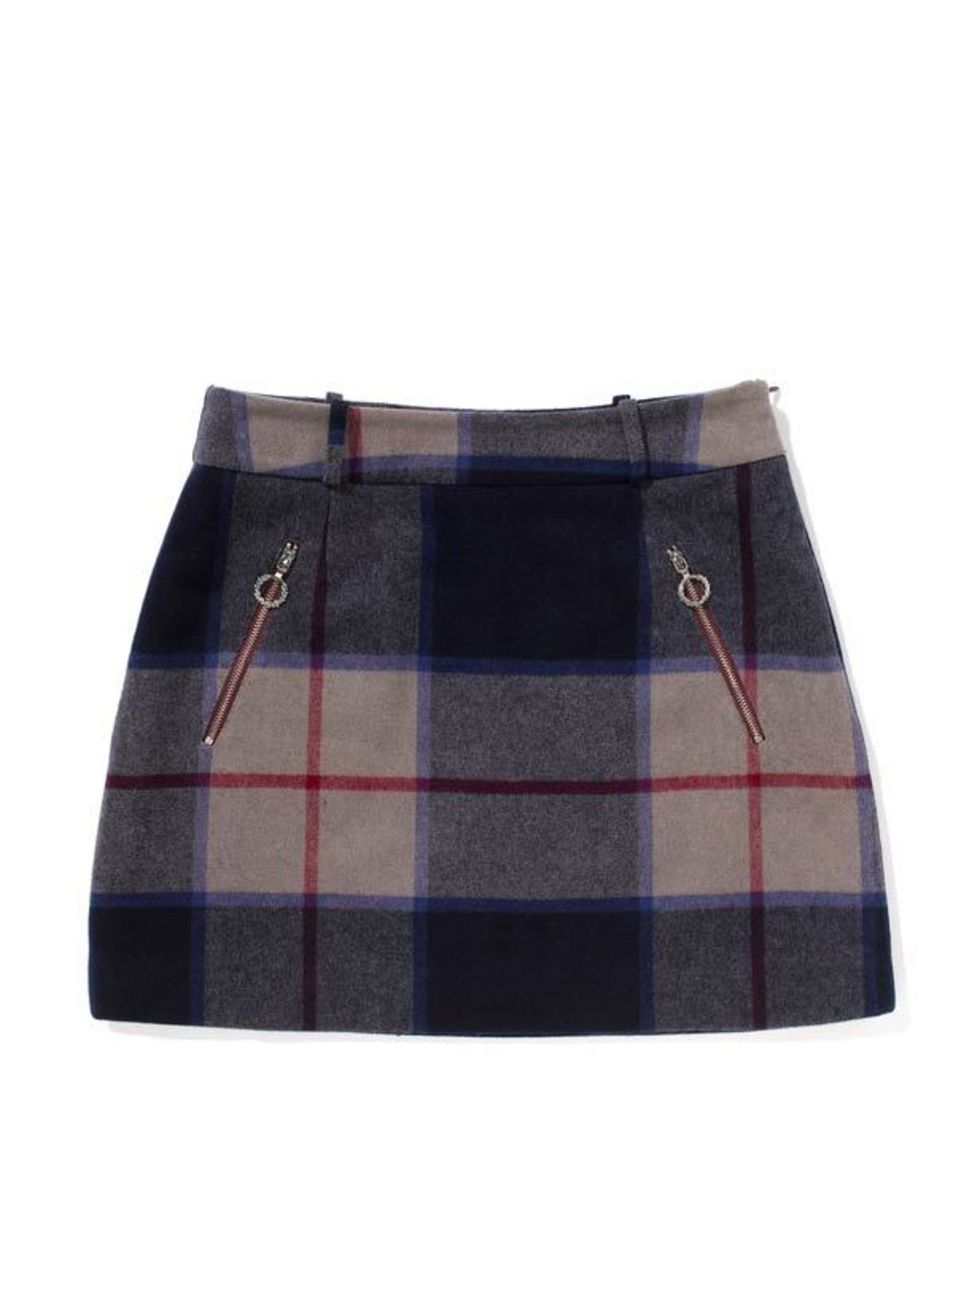 <p>Combining the talent of one of our favourite designers with the modish aesthetic of Fred Perry, this skirts an instant winner <a href="http://www.fredperry.com/laurel-wreath-collection/women/richard-nicoll/">Fred Perry by Richard Nicoll</a> check ski